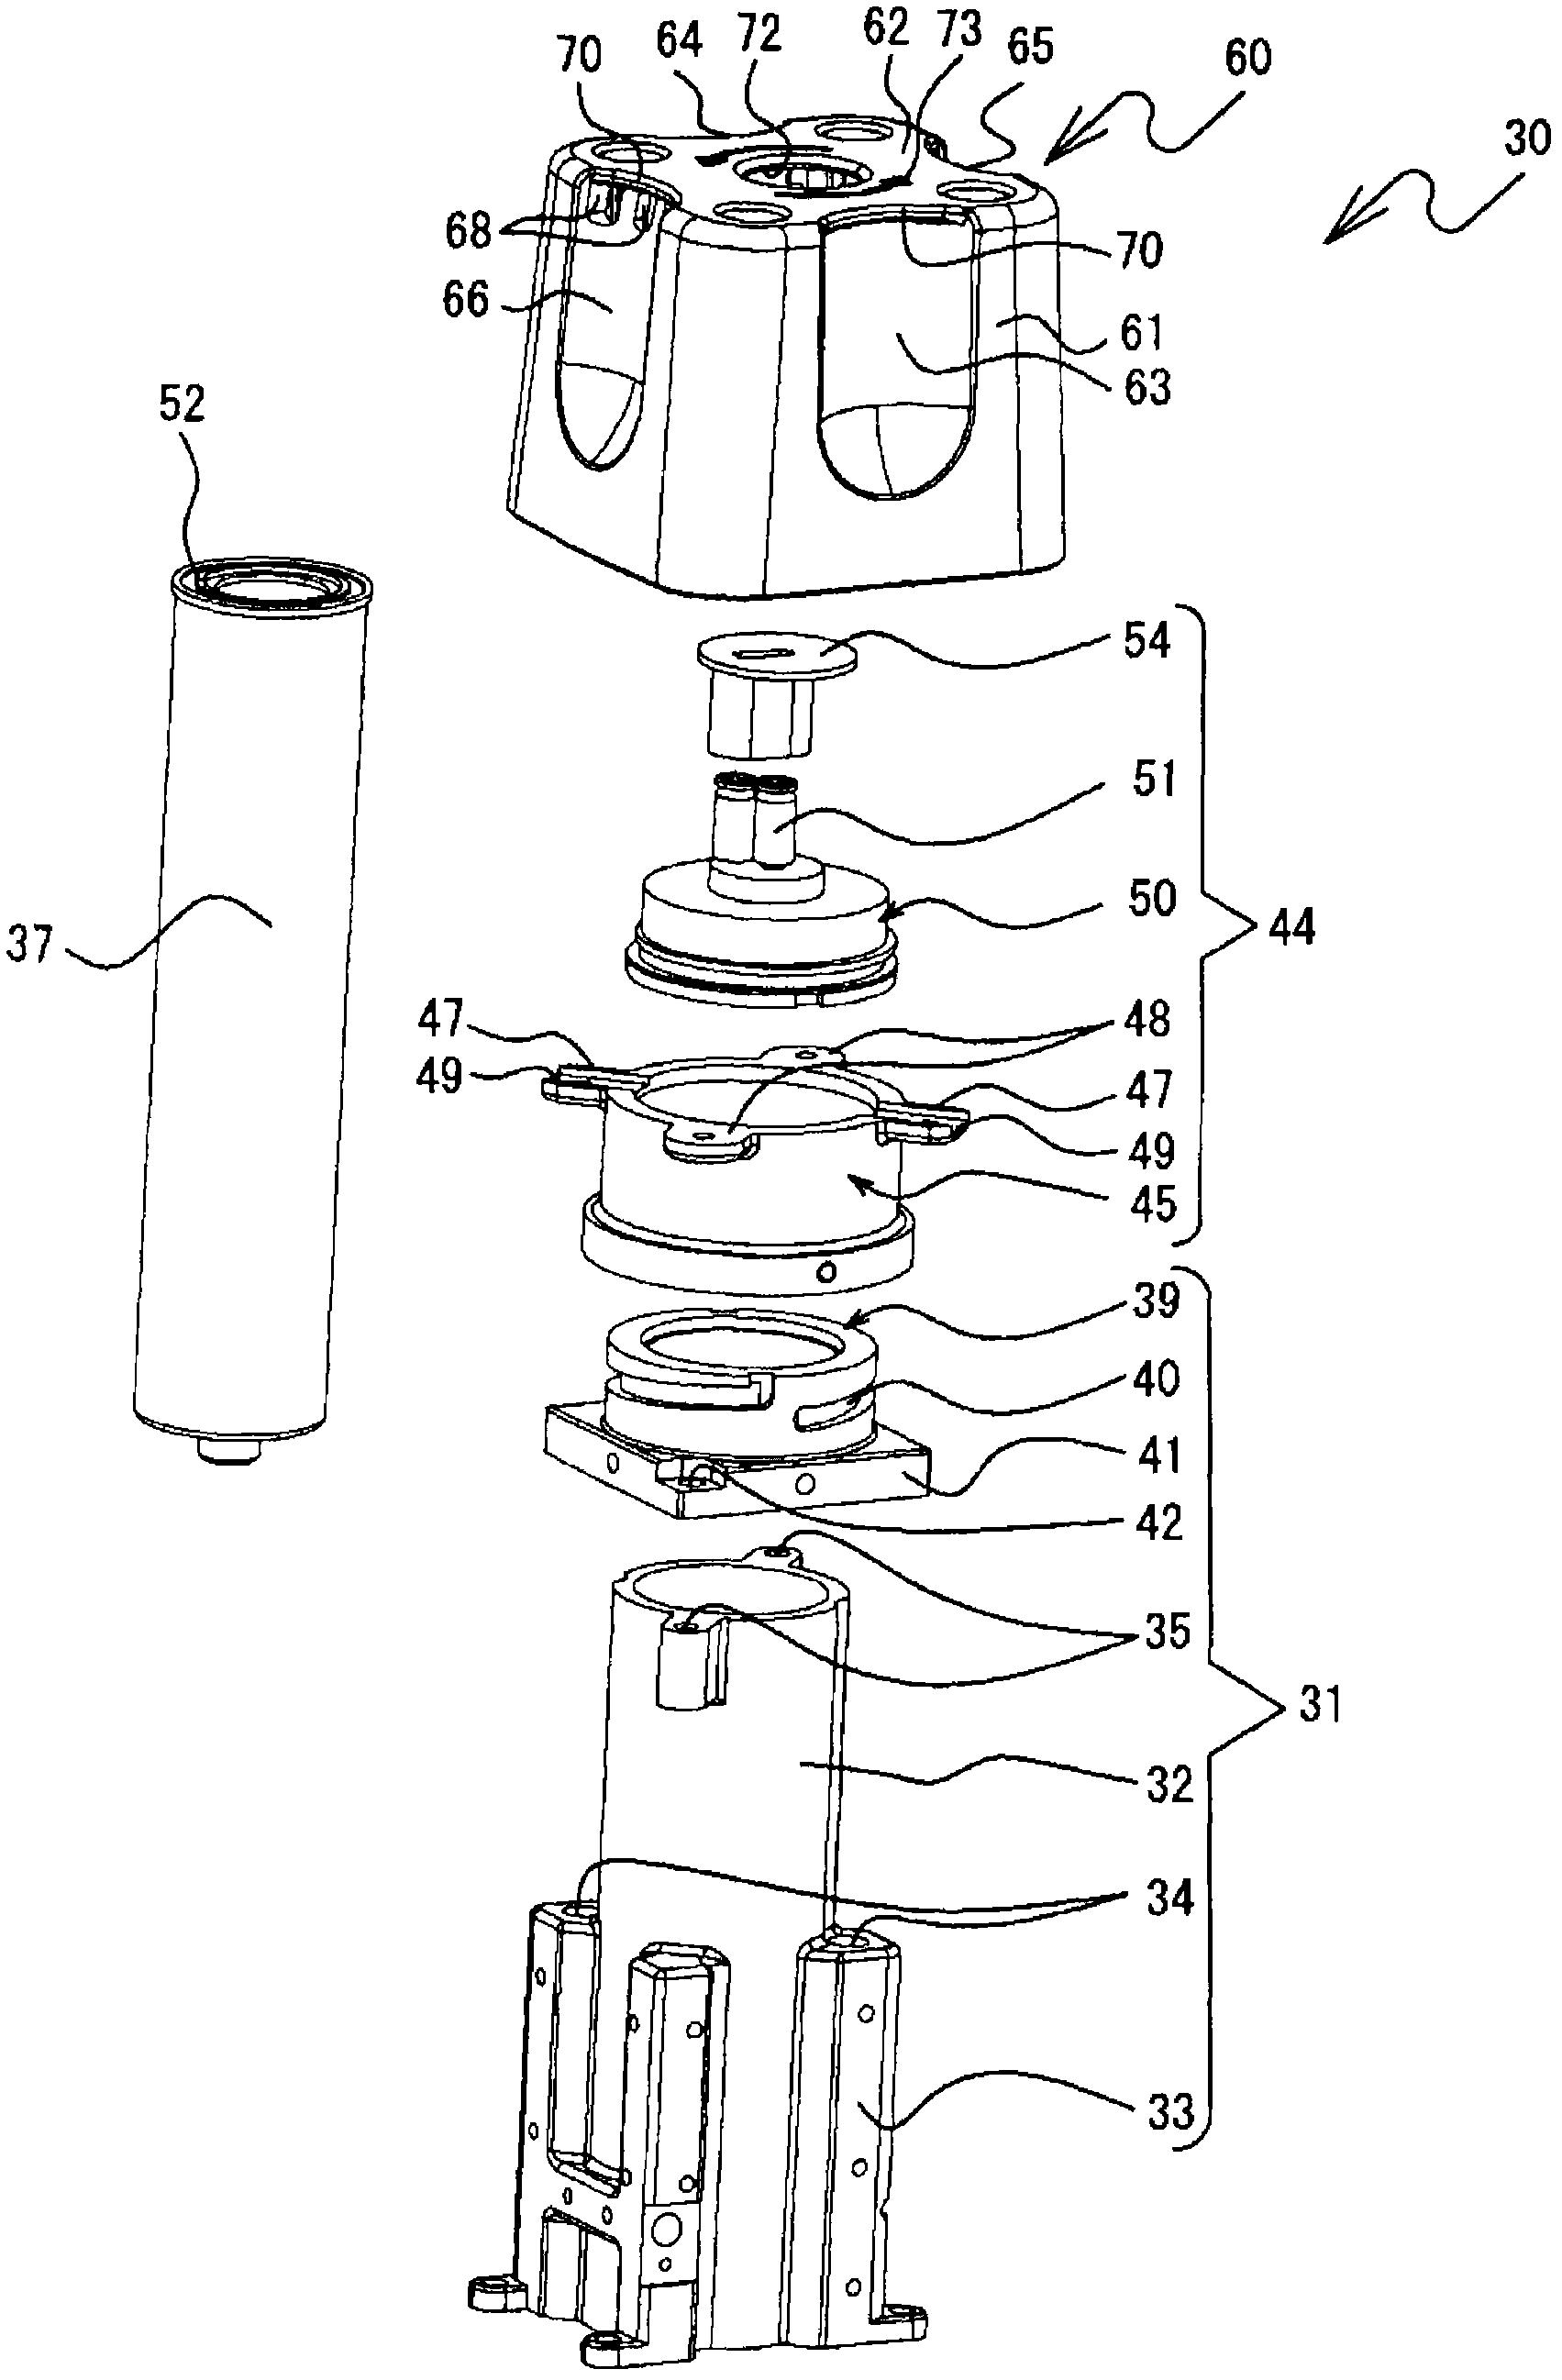 Storage compartment cover and cloth bonding device